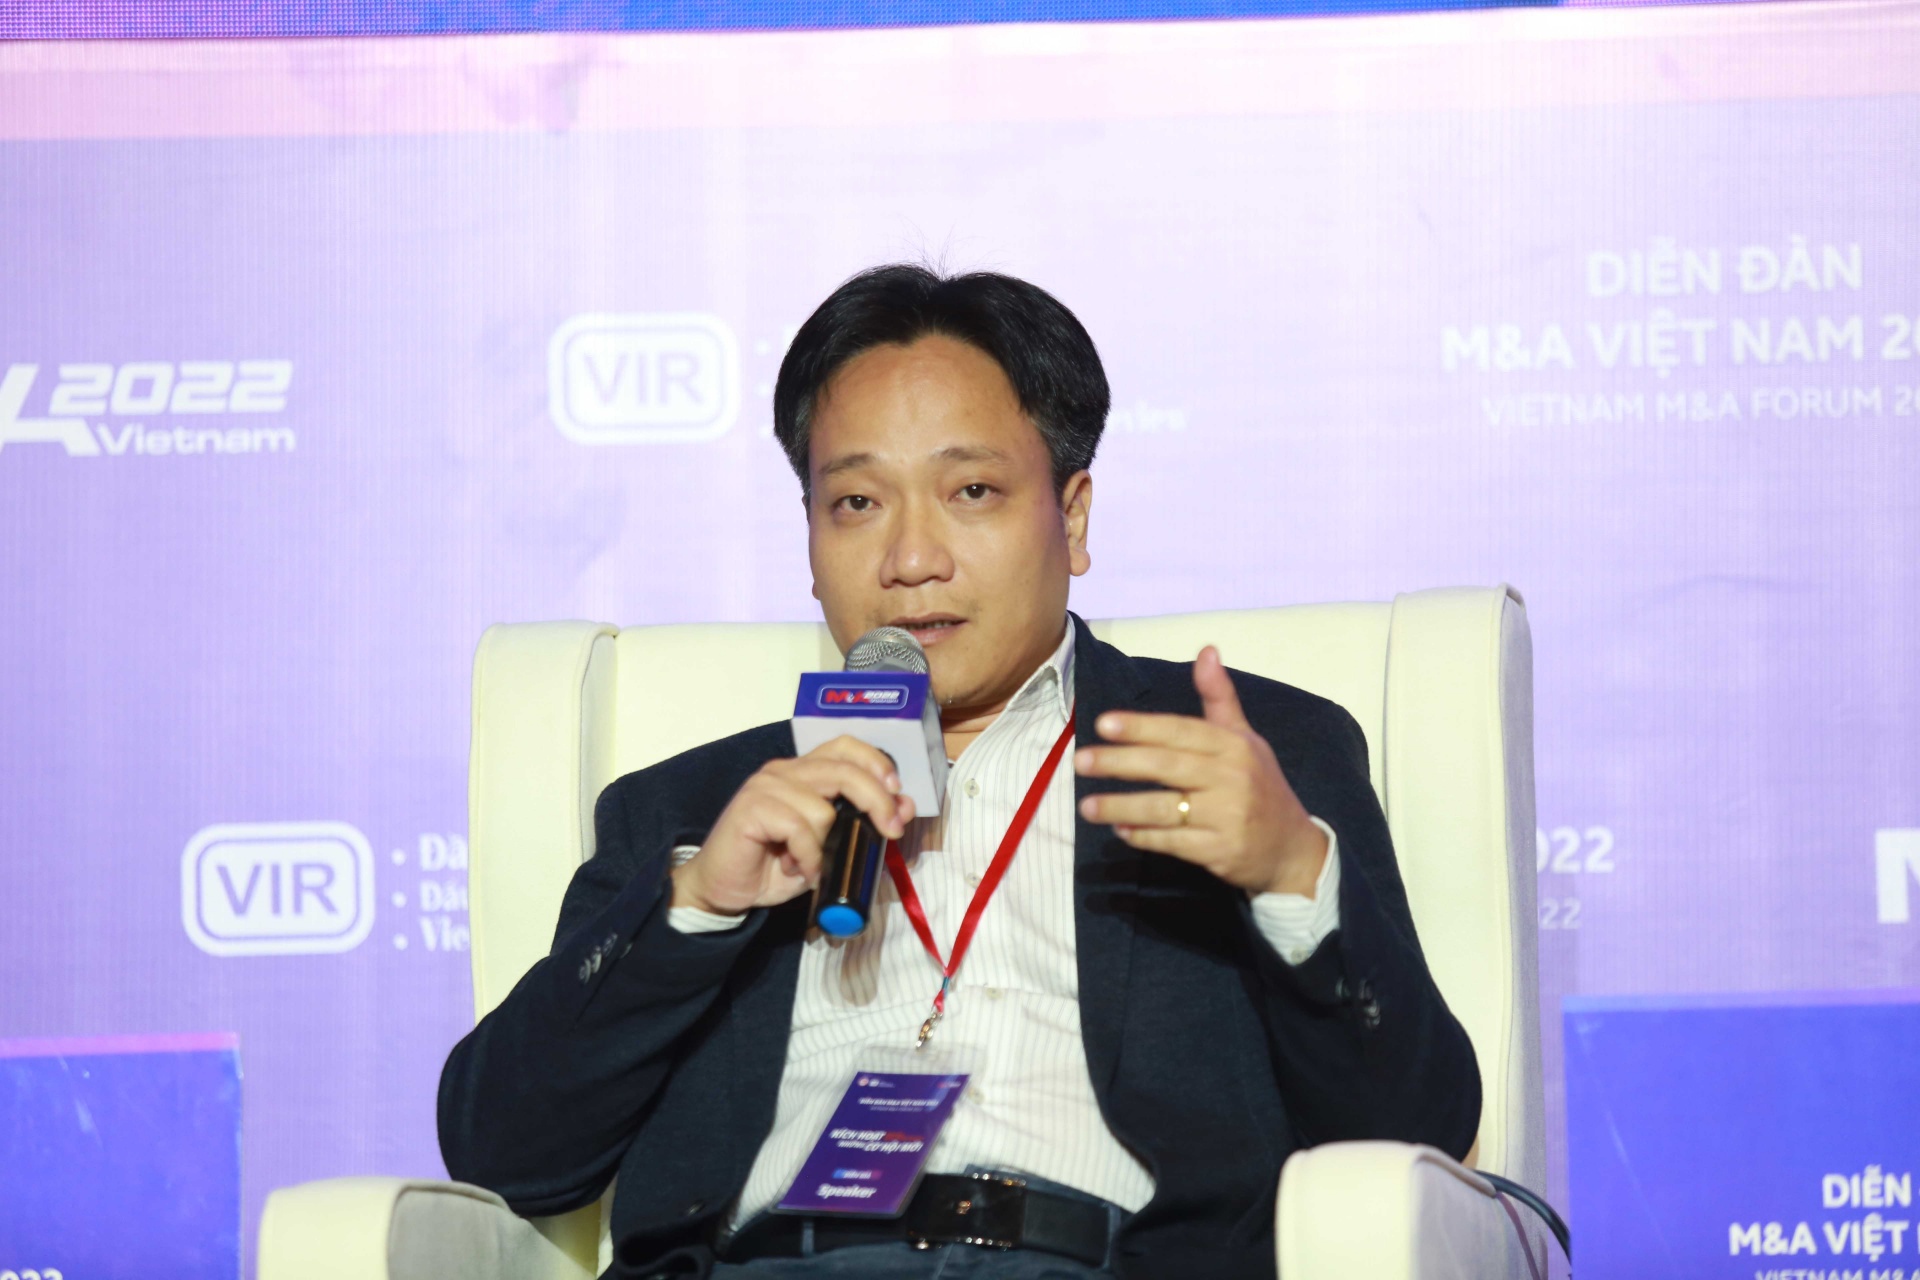 “New Value Creation” session at Vietnam M&A Forum 2022